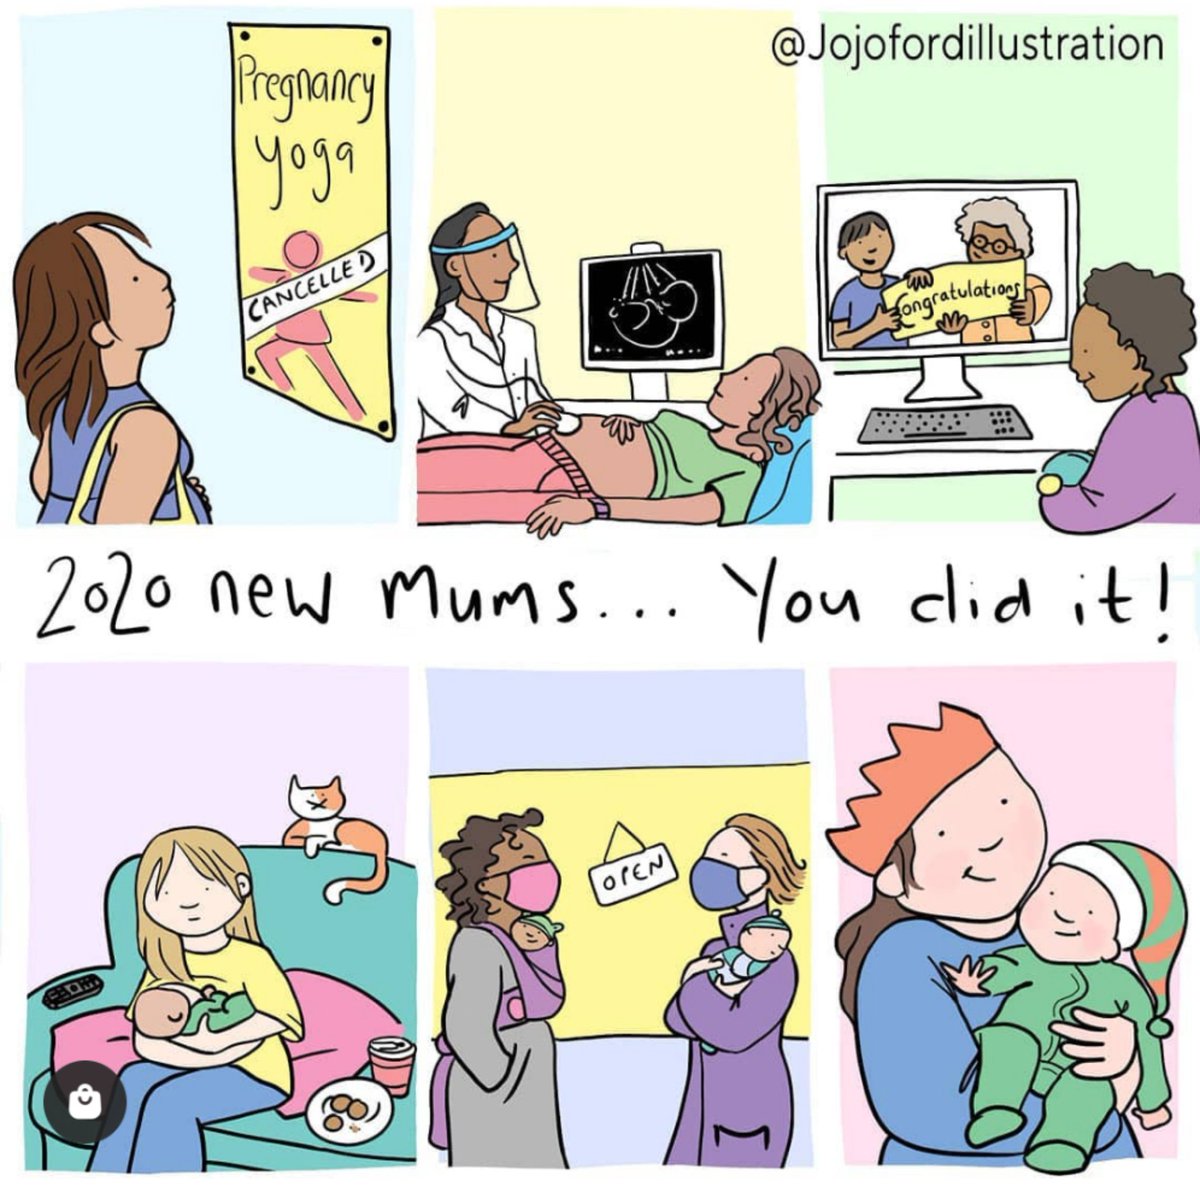 This one is for all the new mums, pregnant people, their partners and professionals who made it through, despite it all. We know it's been hard in patches or permanently. We firmly promise to do everything we can to make birth better in 2021. 💜 Thank you @jojofordillustration